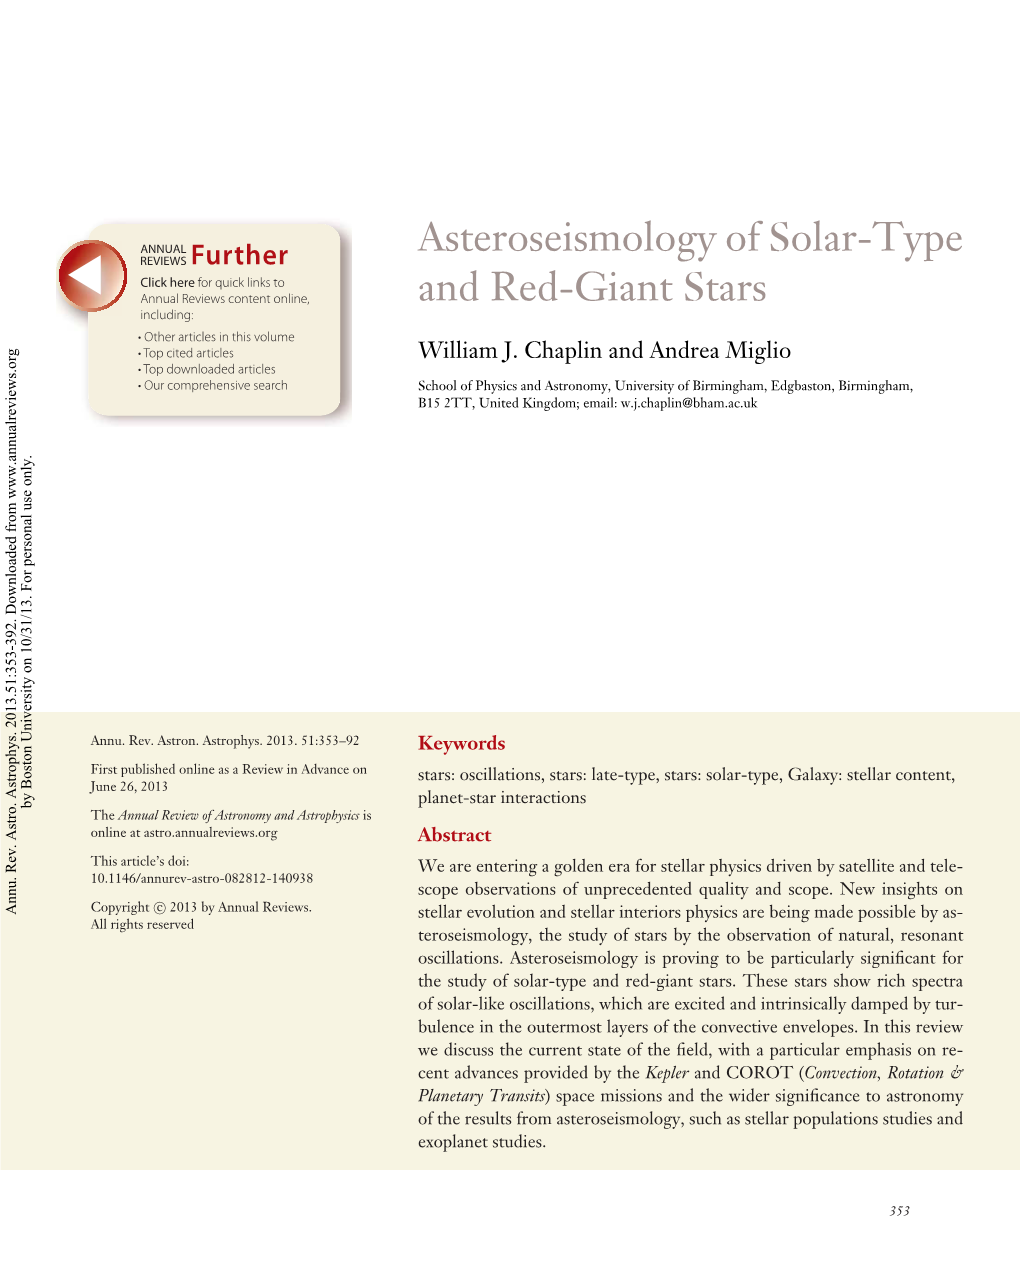 Asteroseismology of Solar-Type and Red-Giant Stars